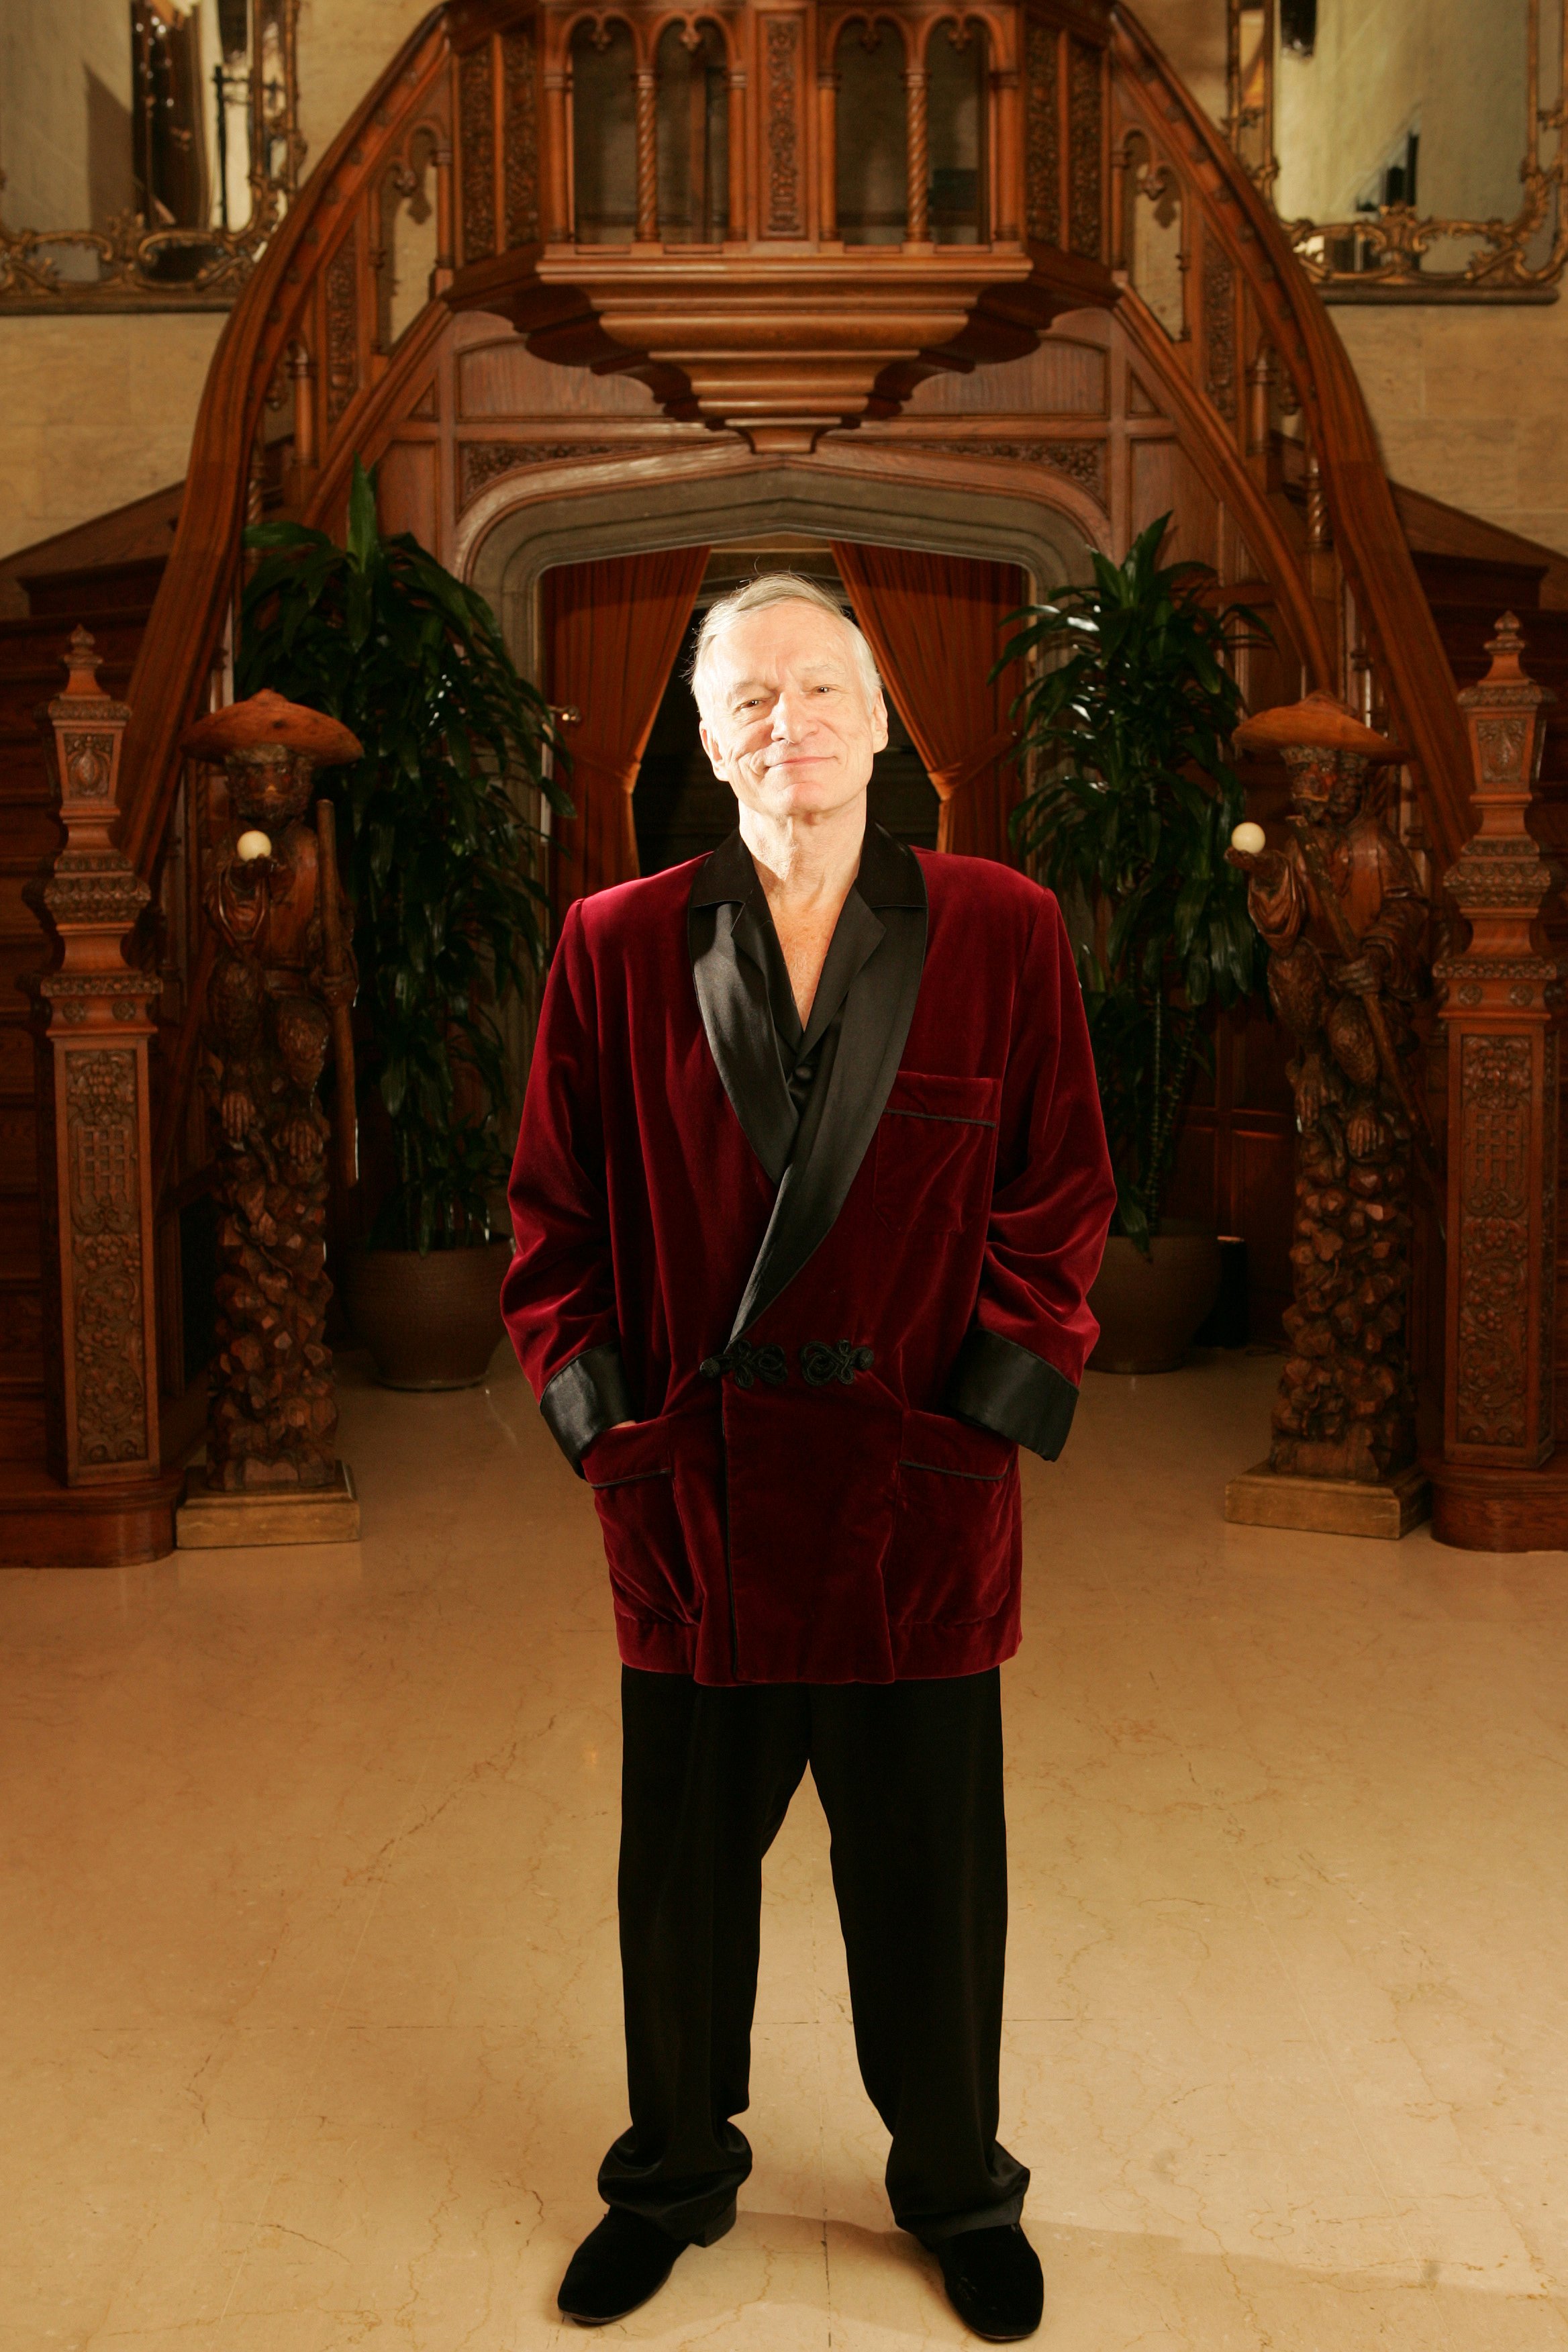 Hugh Hefner poses for a photo on November 17, 2005, in Los Angeles, California. | Source: Getty Images